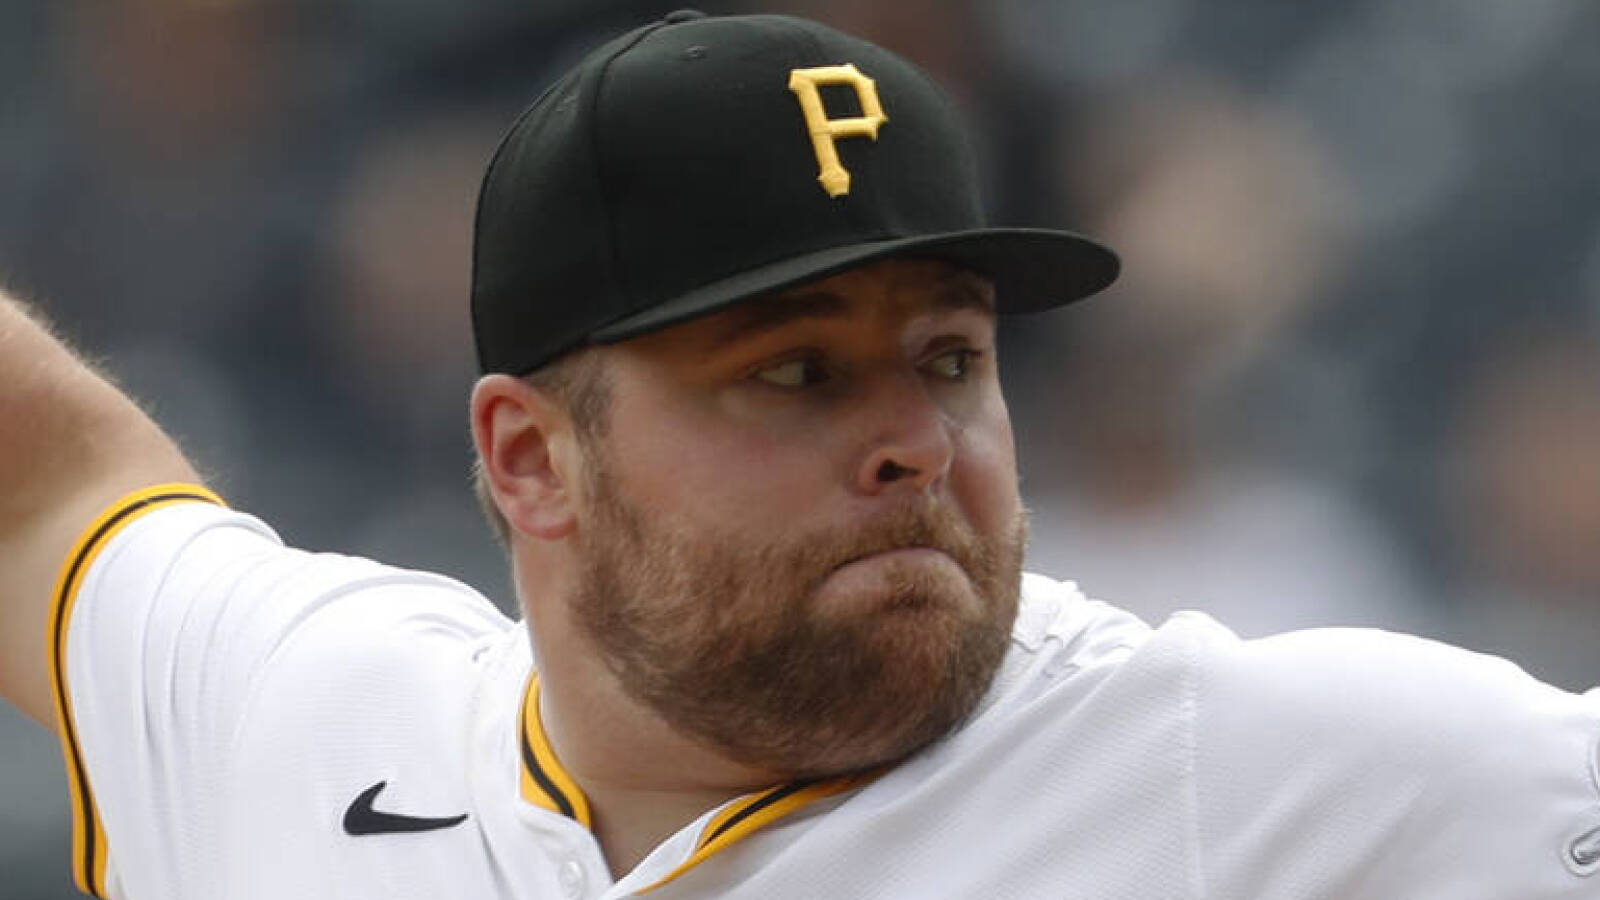 Watch: Pirates 1B defends closer after another blown save